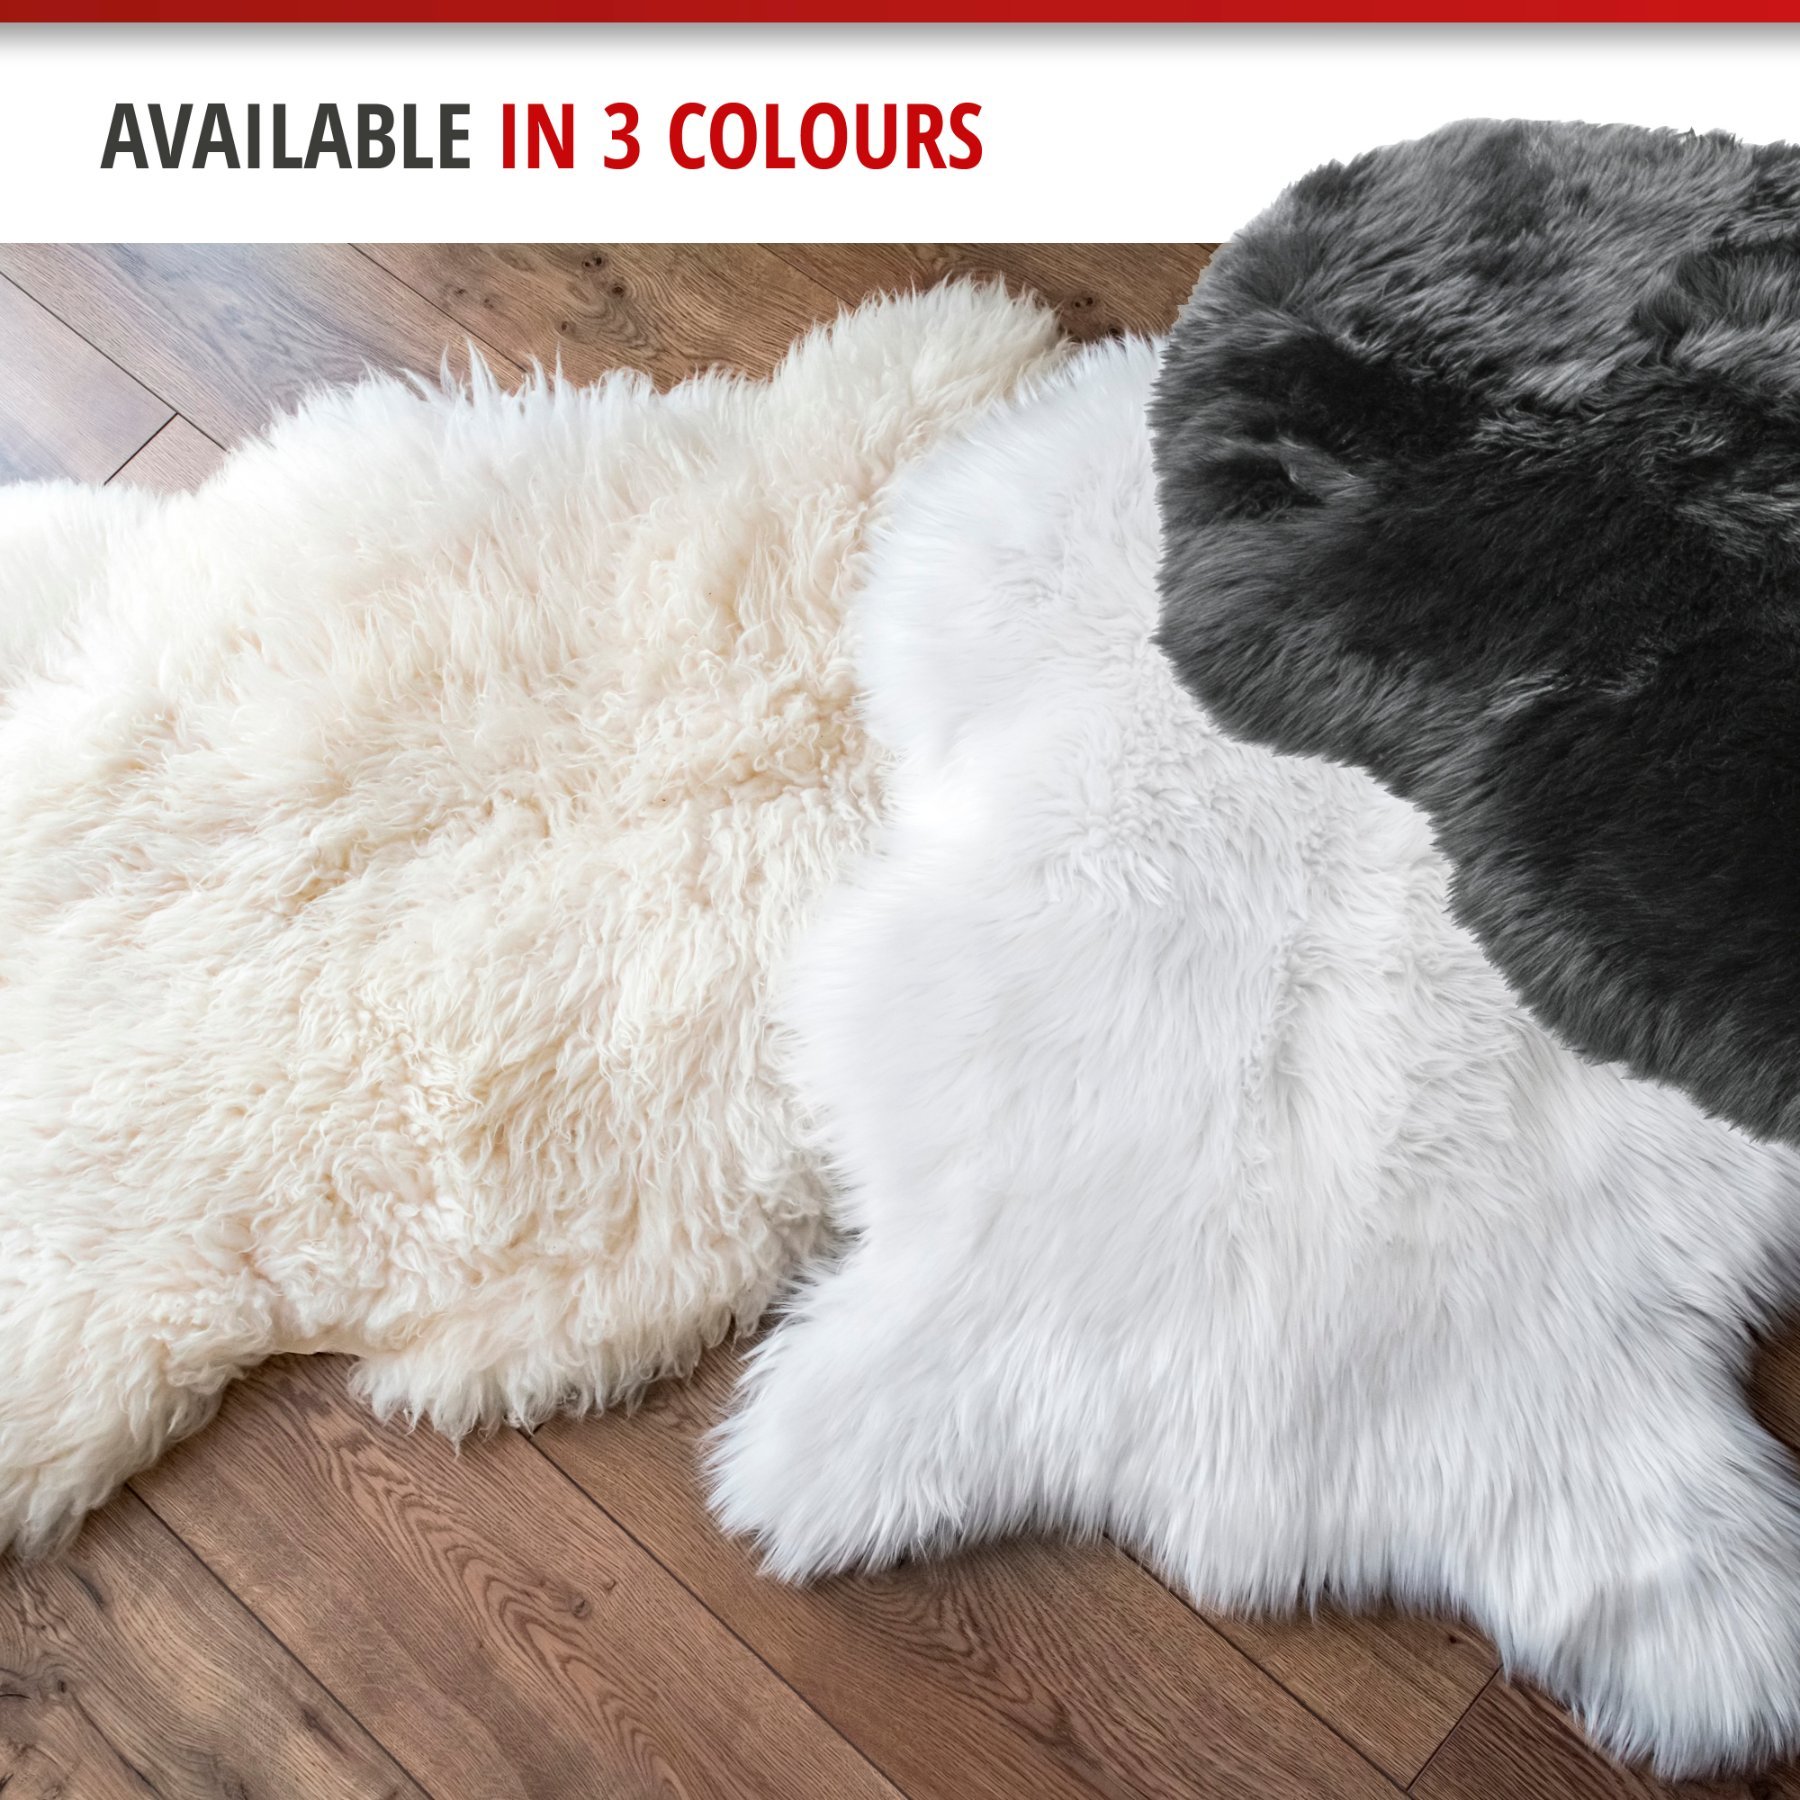 Lambskin rug Blake white 80-90cm made of 100% natural lambskin, wool height 50mm, ideal in living room & bedroom